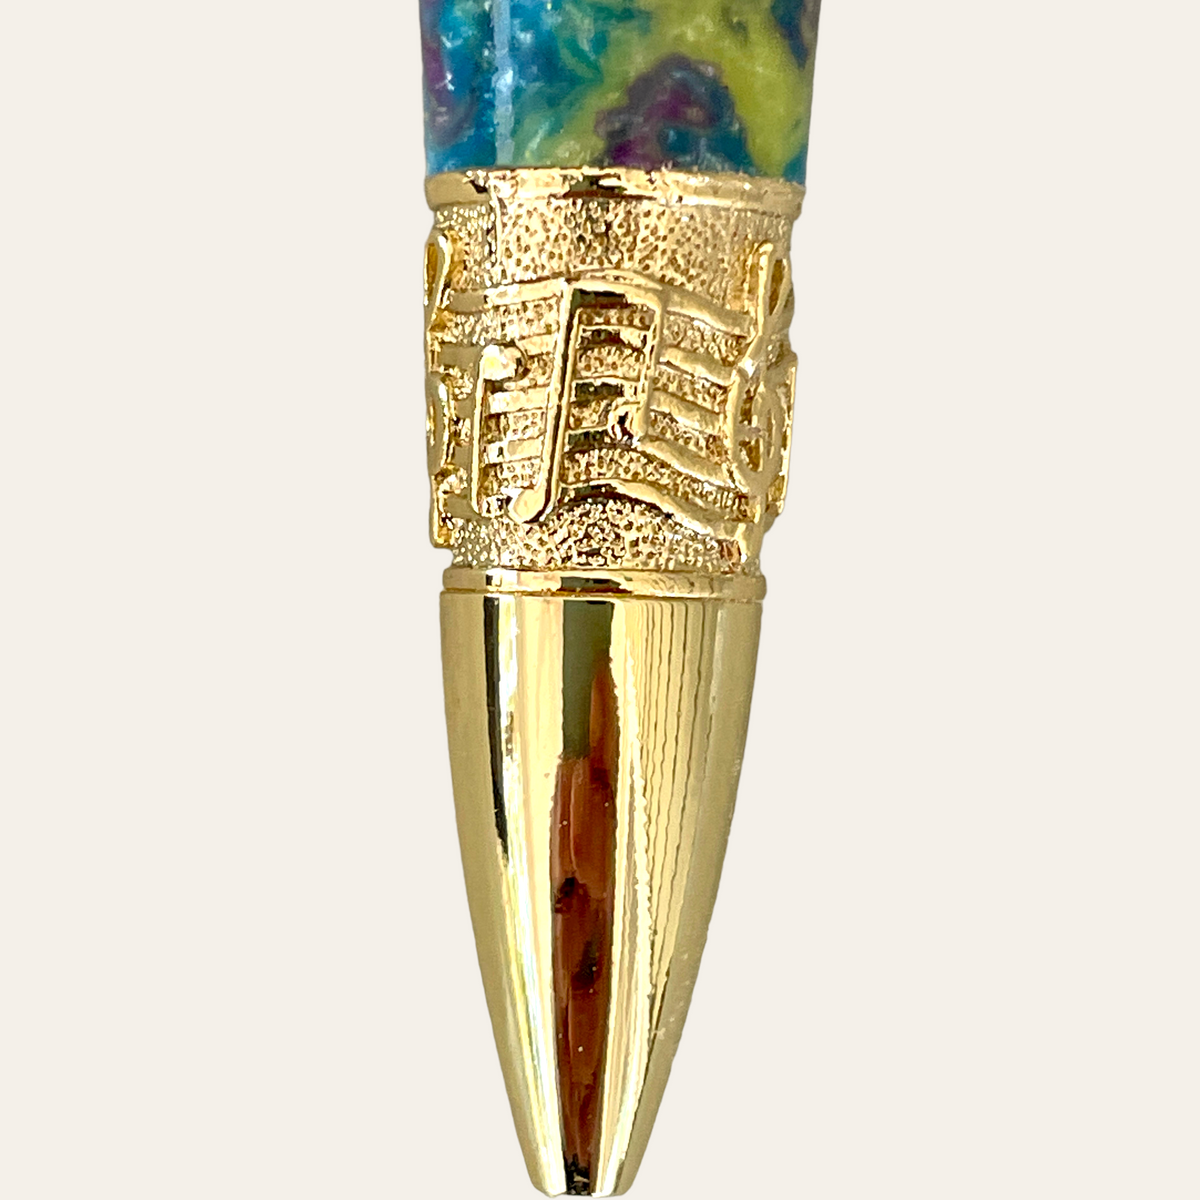 Hand Turned Resin Music Pen With Gold Trim- Rock N Roll Pens Paul's Hand Turned Creations   